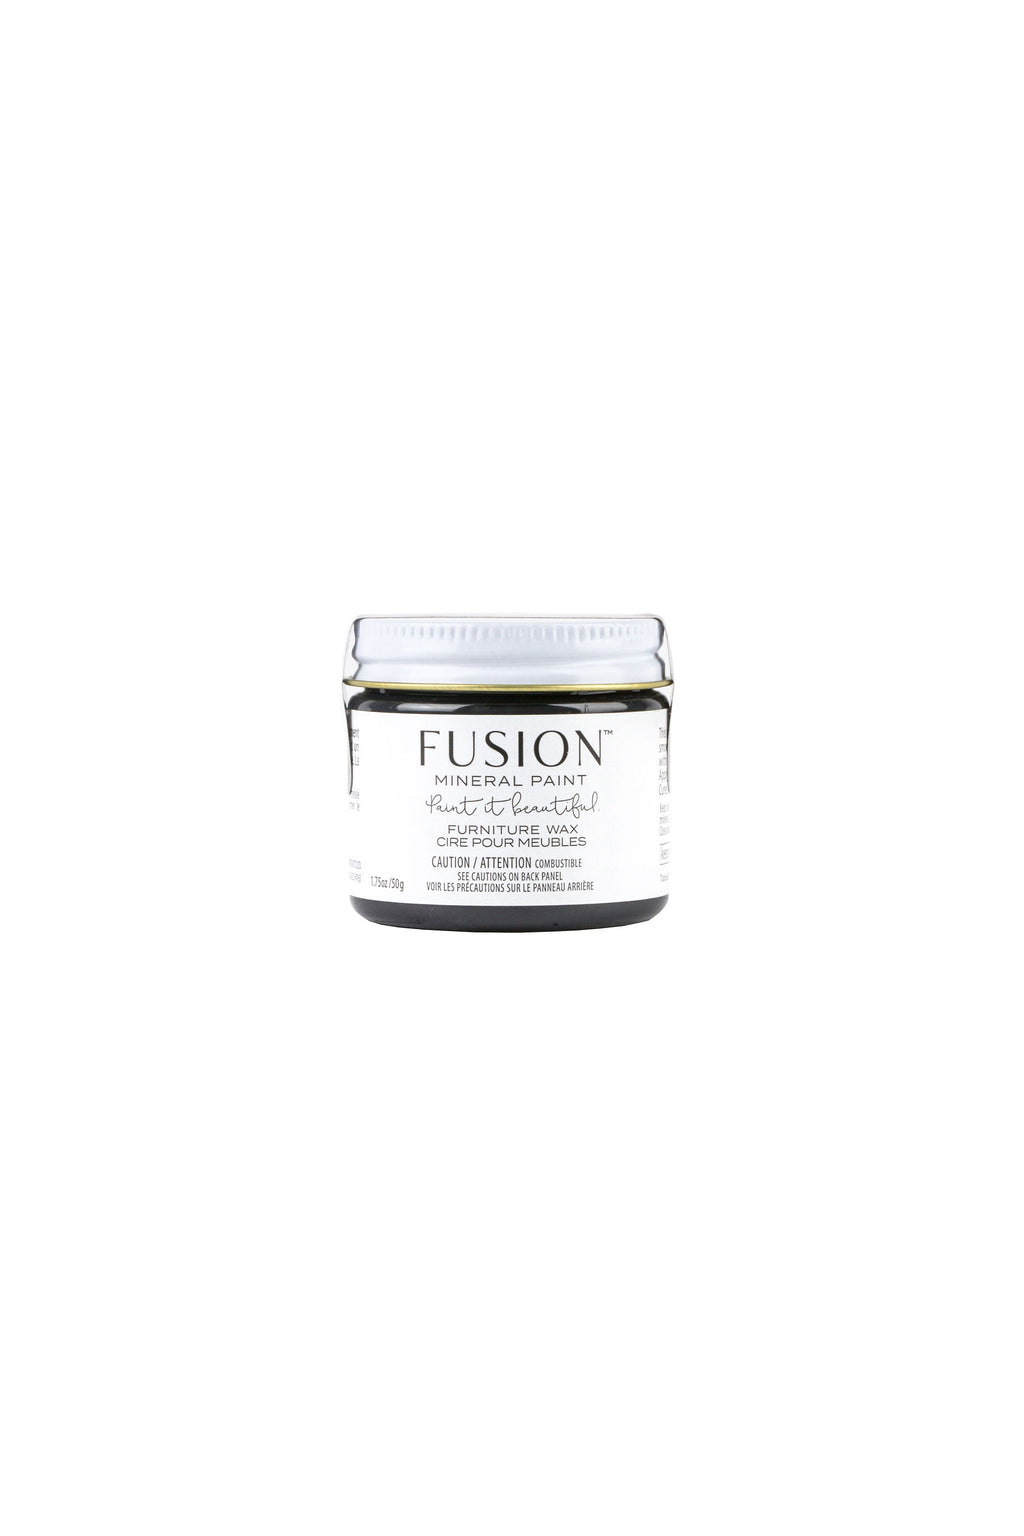 Furniture Wax – Fusion Mineral Paint